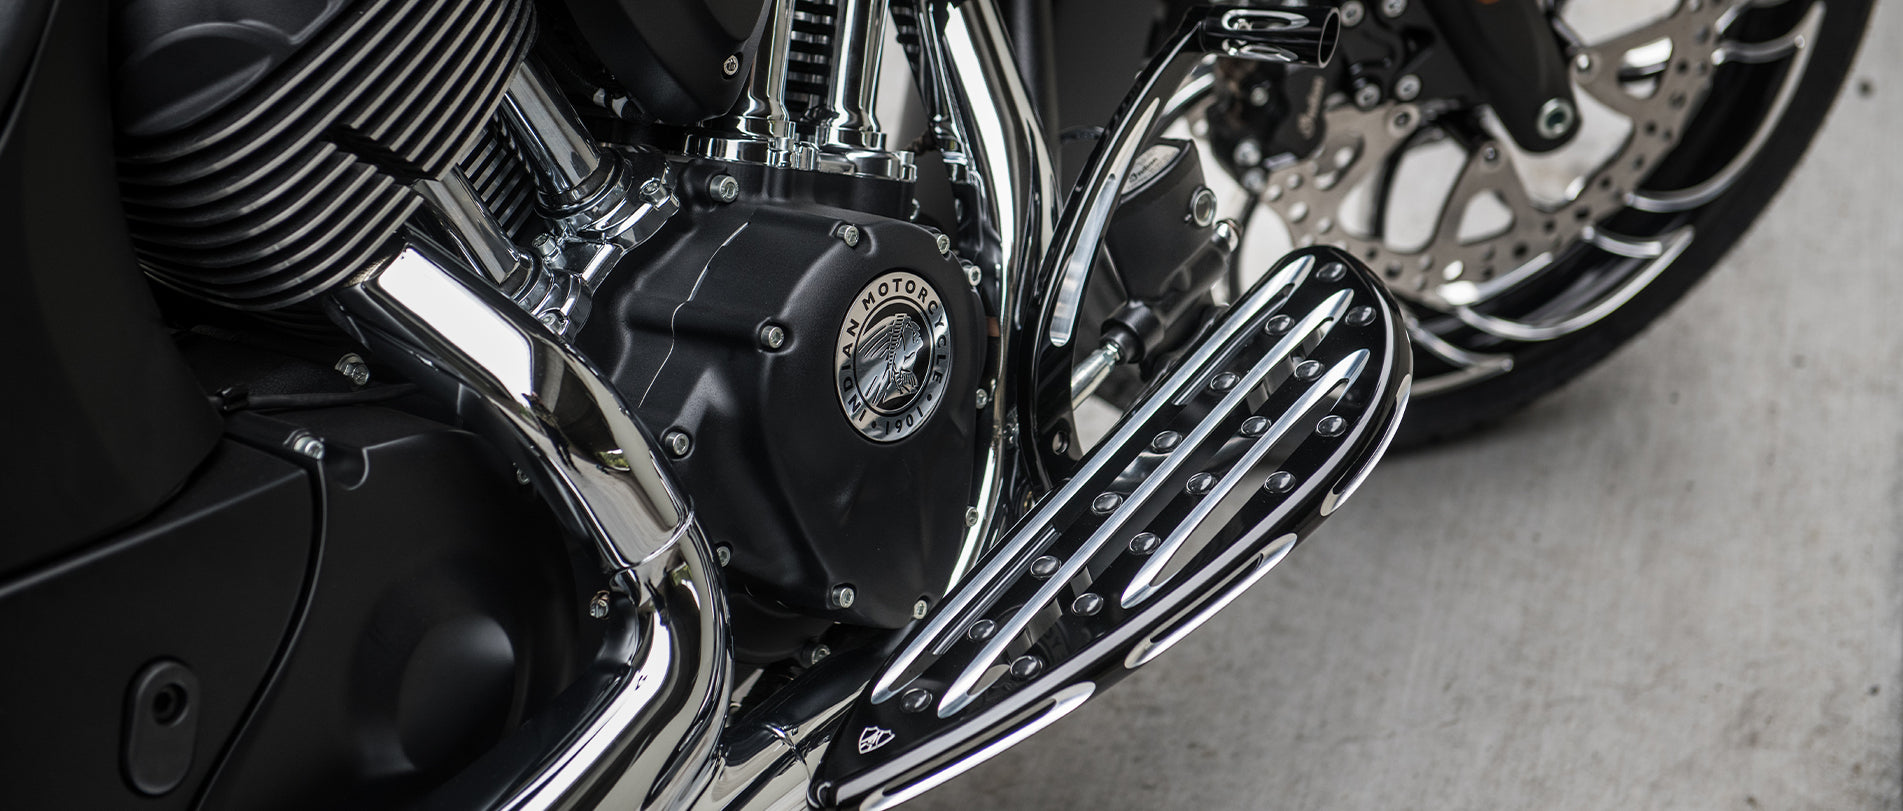 Footpegs & Foot Controls For Indian Motorcycle®